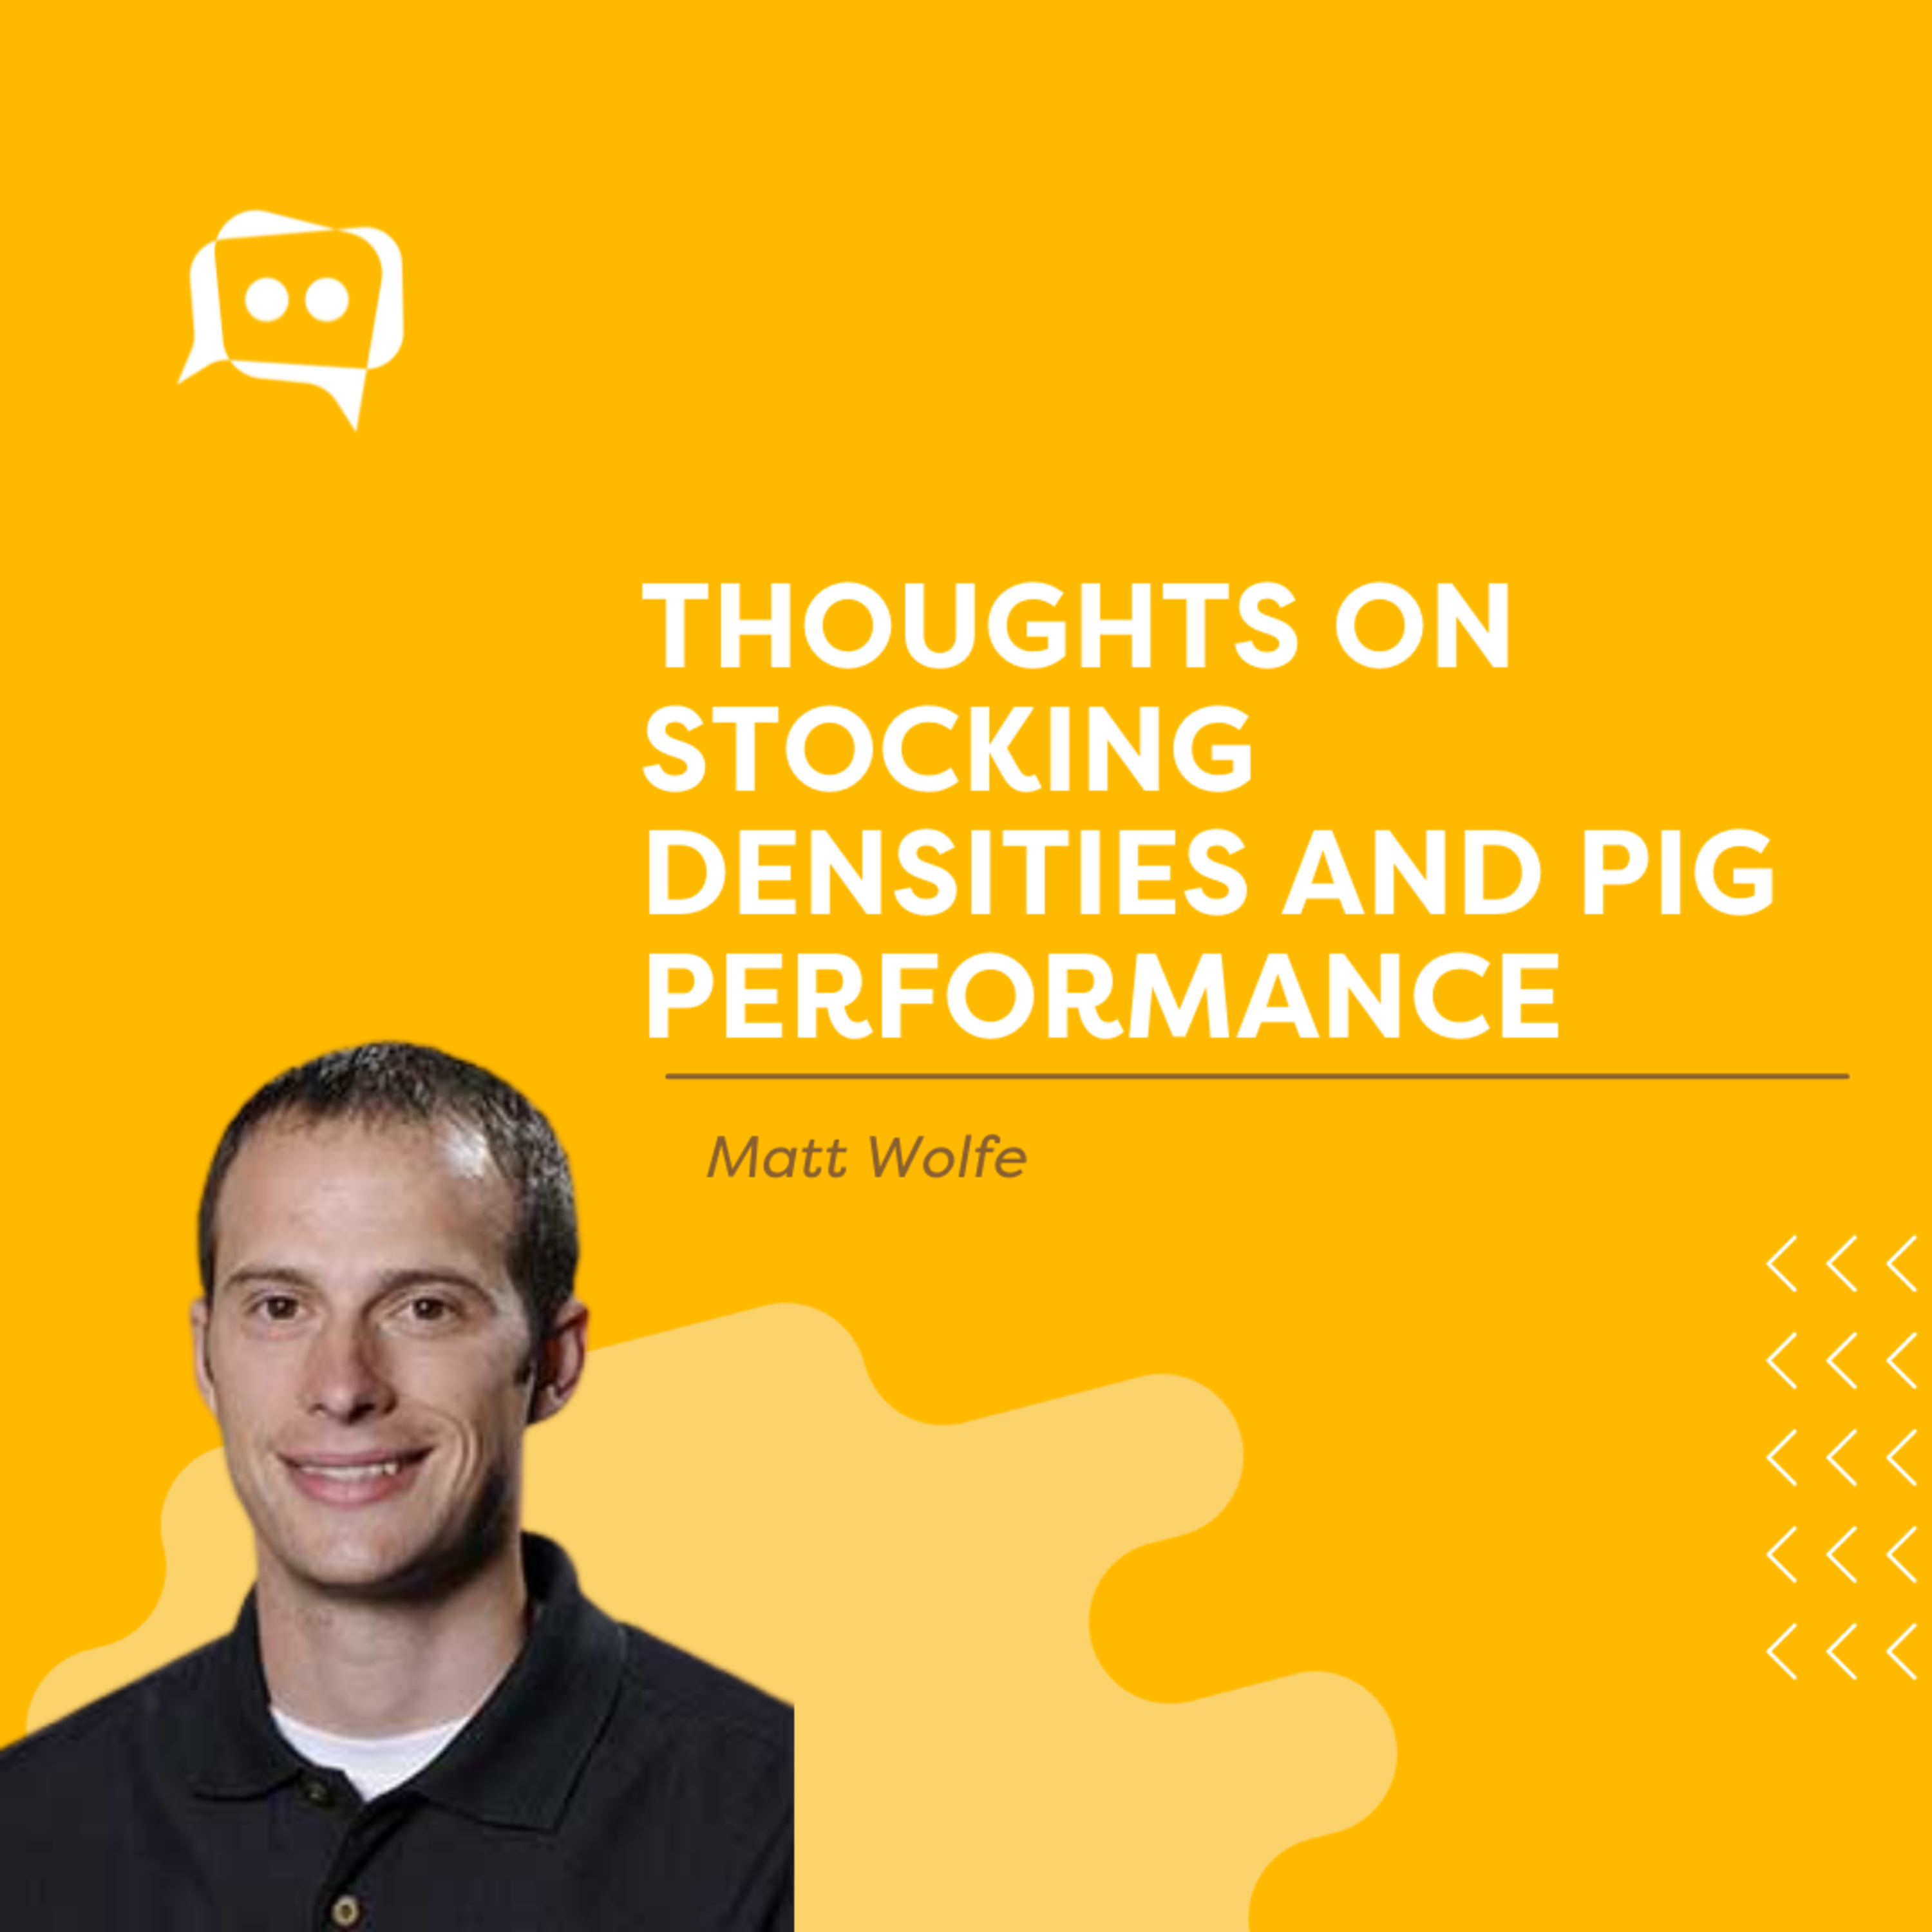 #SHORTS: Thoughts on stocking densities and pig performance, with Matt Wolfe